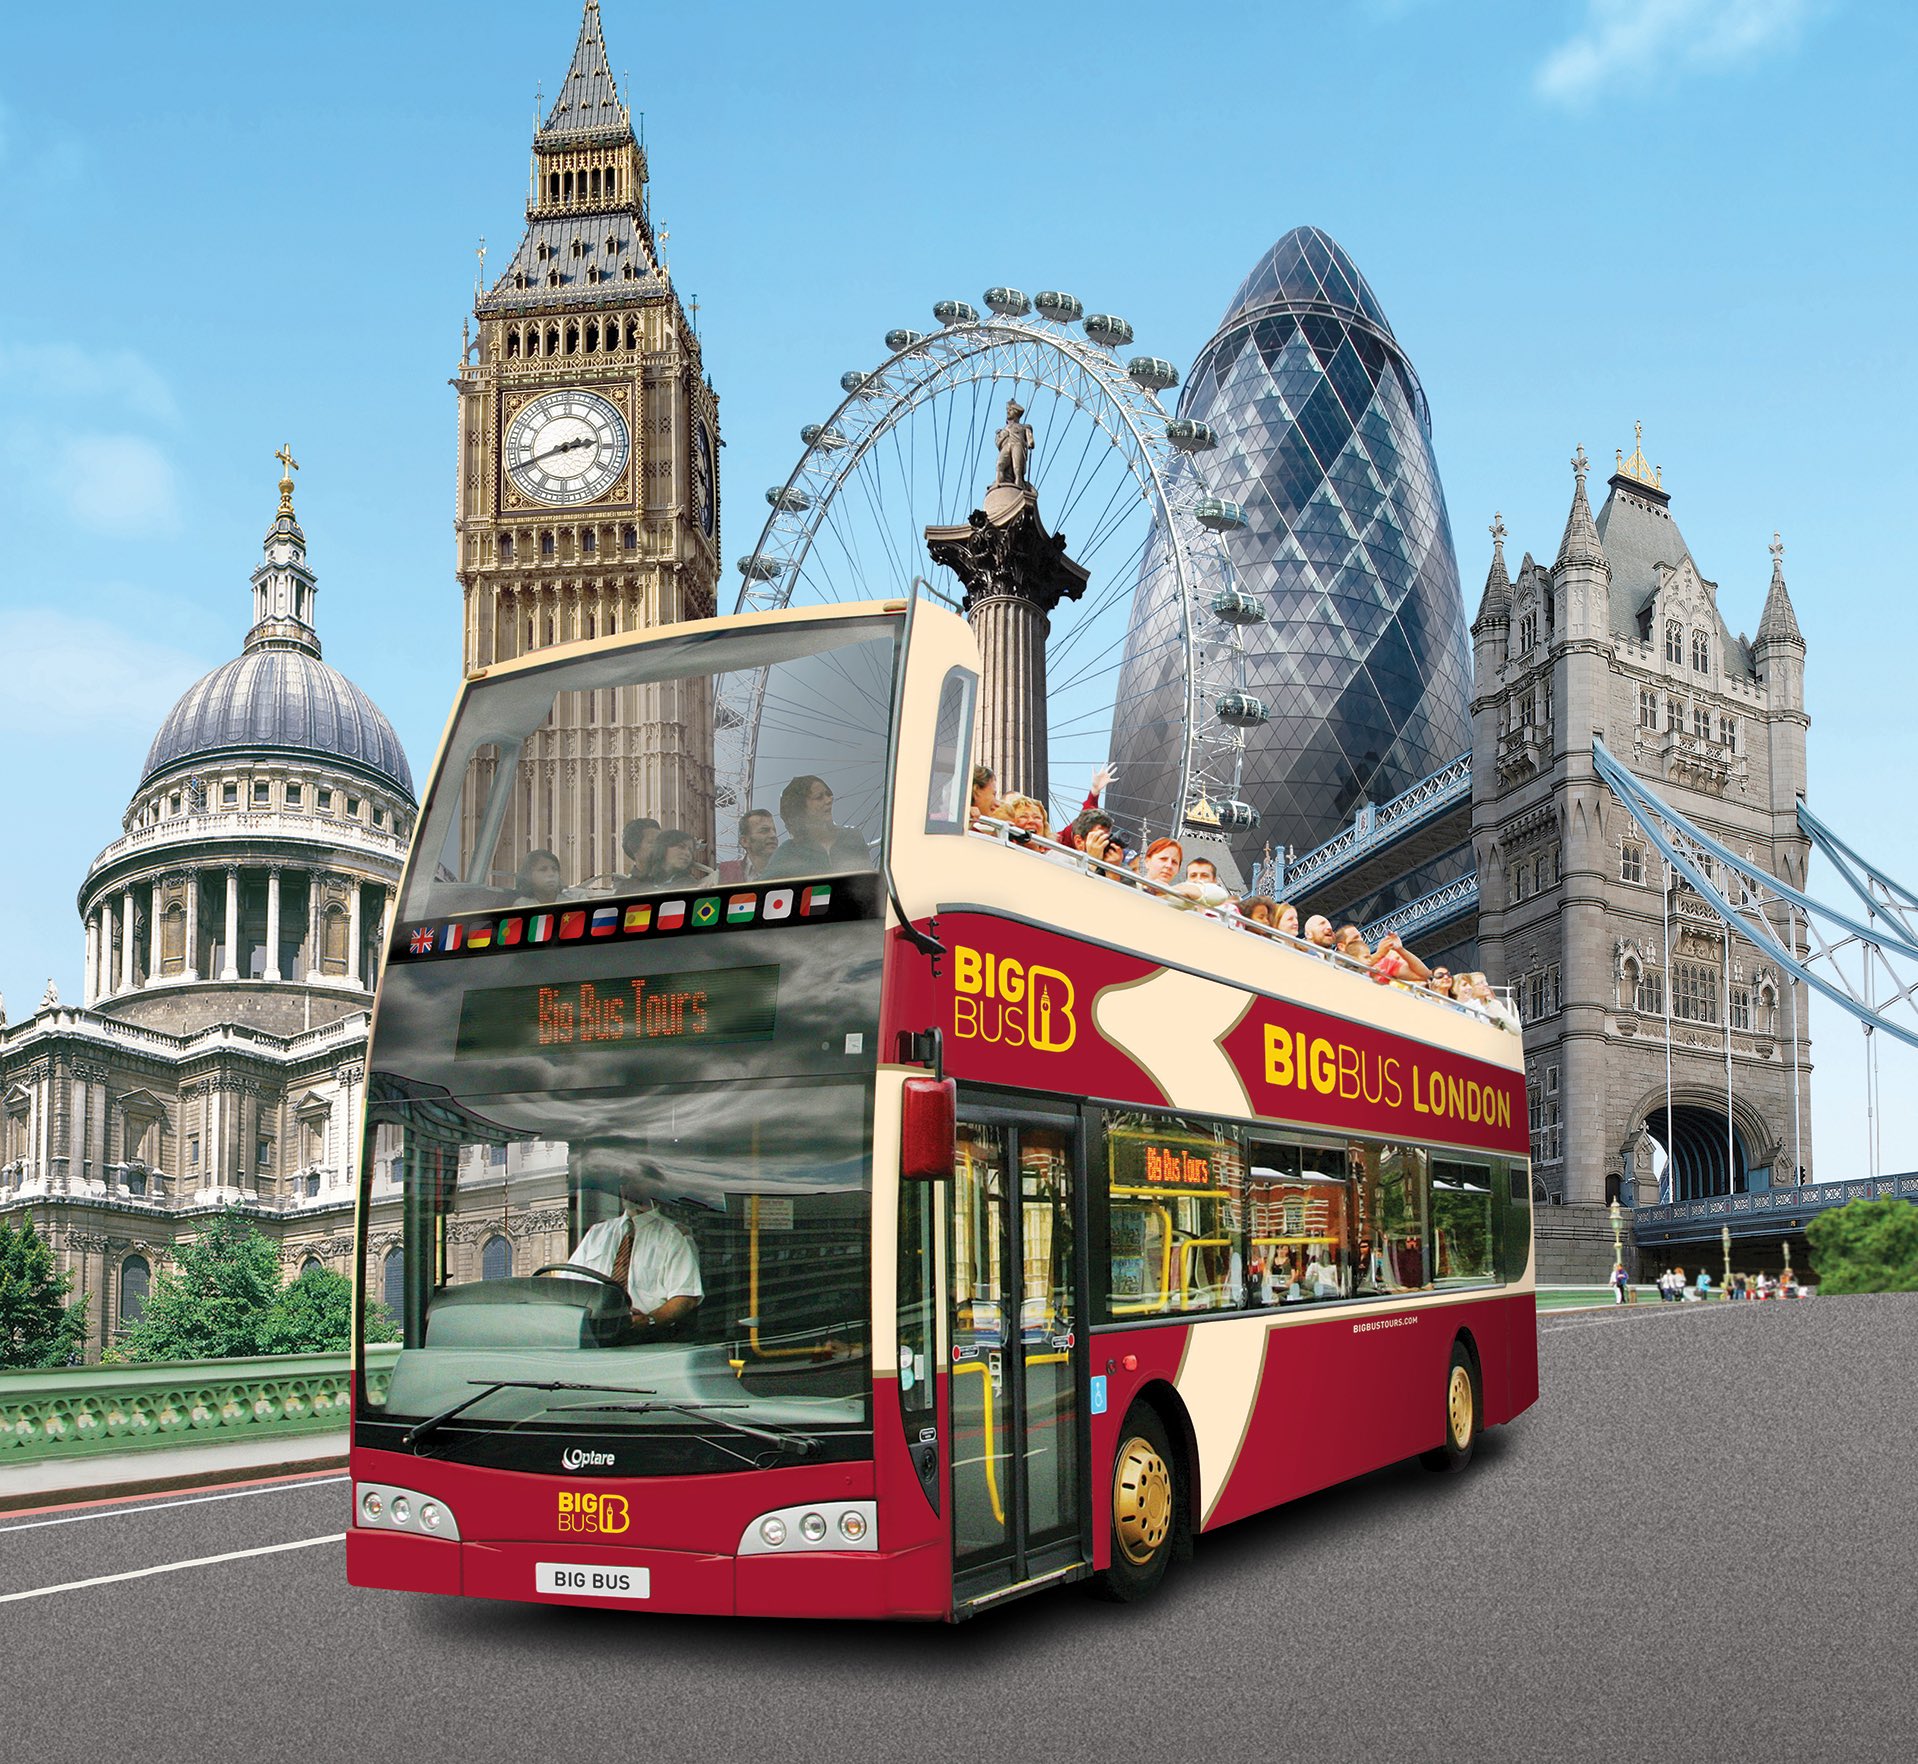 lilla solnedgang ballon IC London Park Lane on Twitter: "The Big Bus sightseeing tours of London is  one of the best ways to soak up the city's atmosphere with ease. On open-top  double-decker buses, they